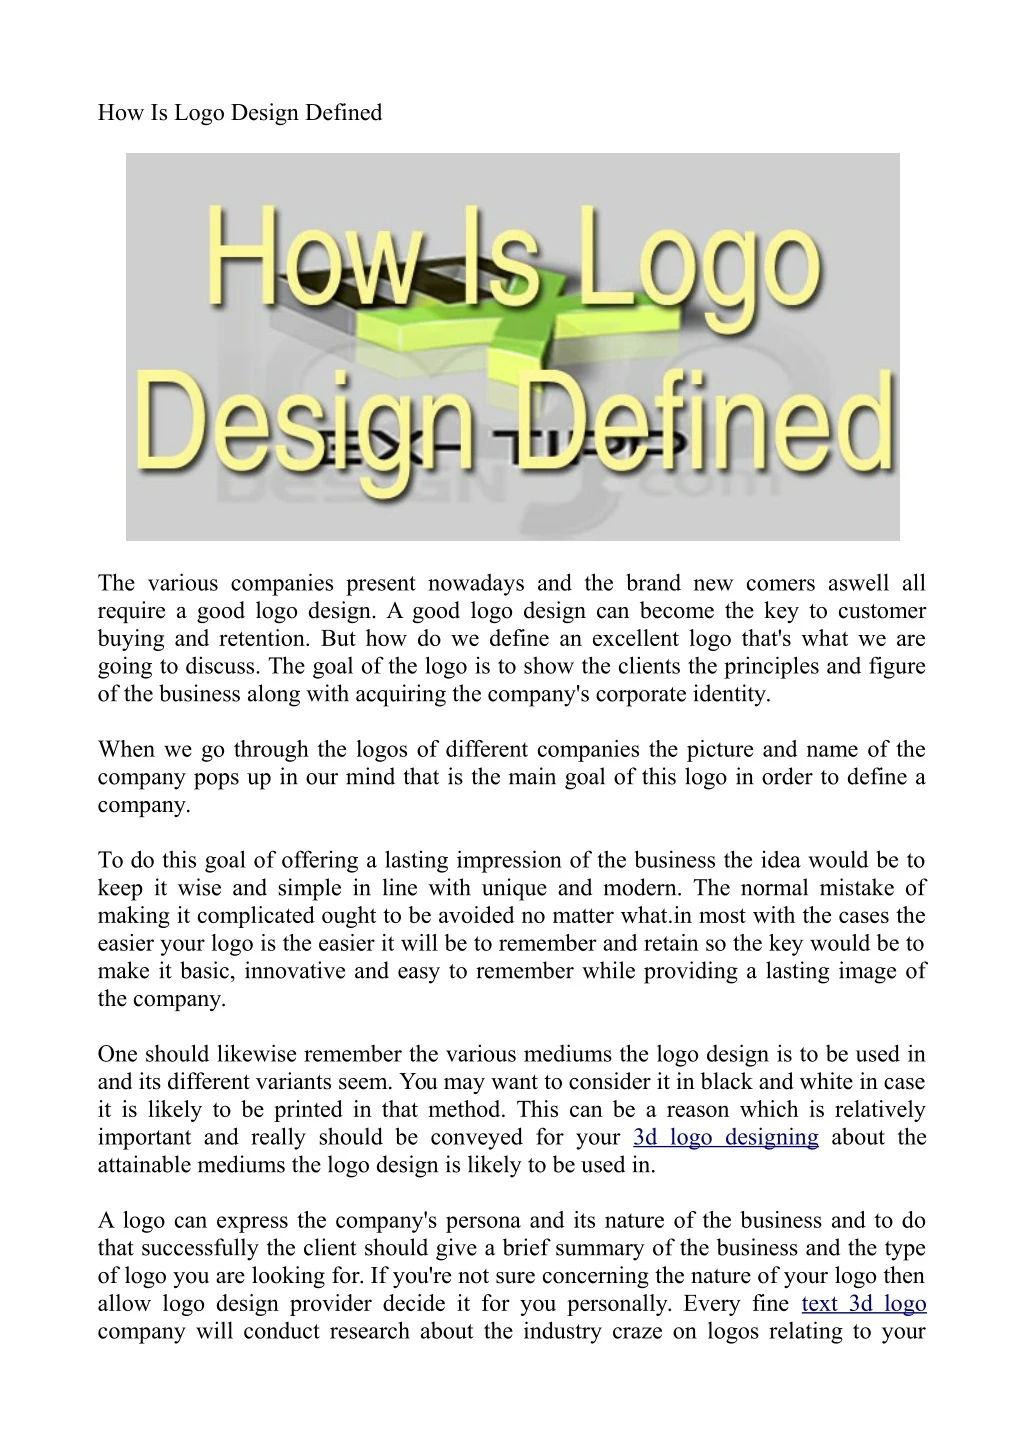 how is logo design defined